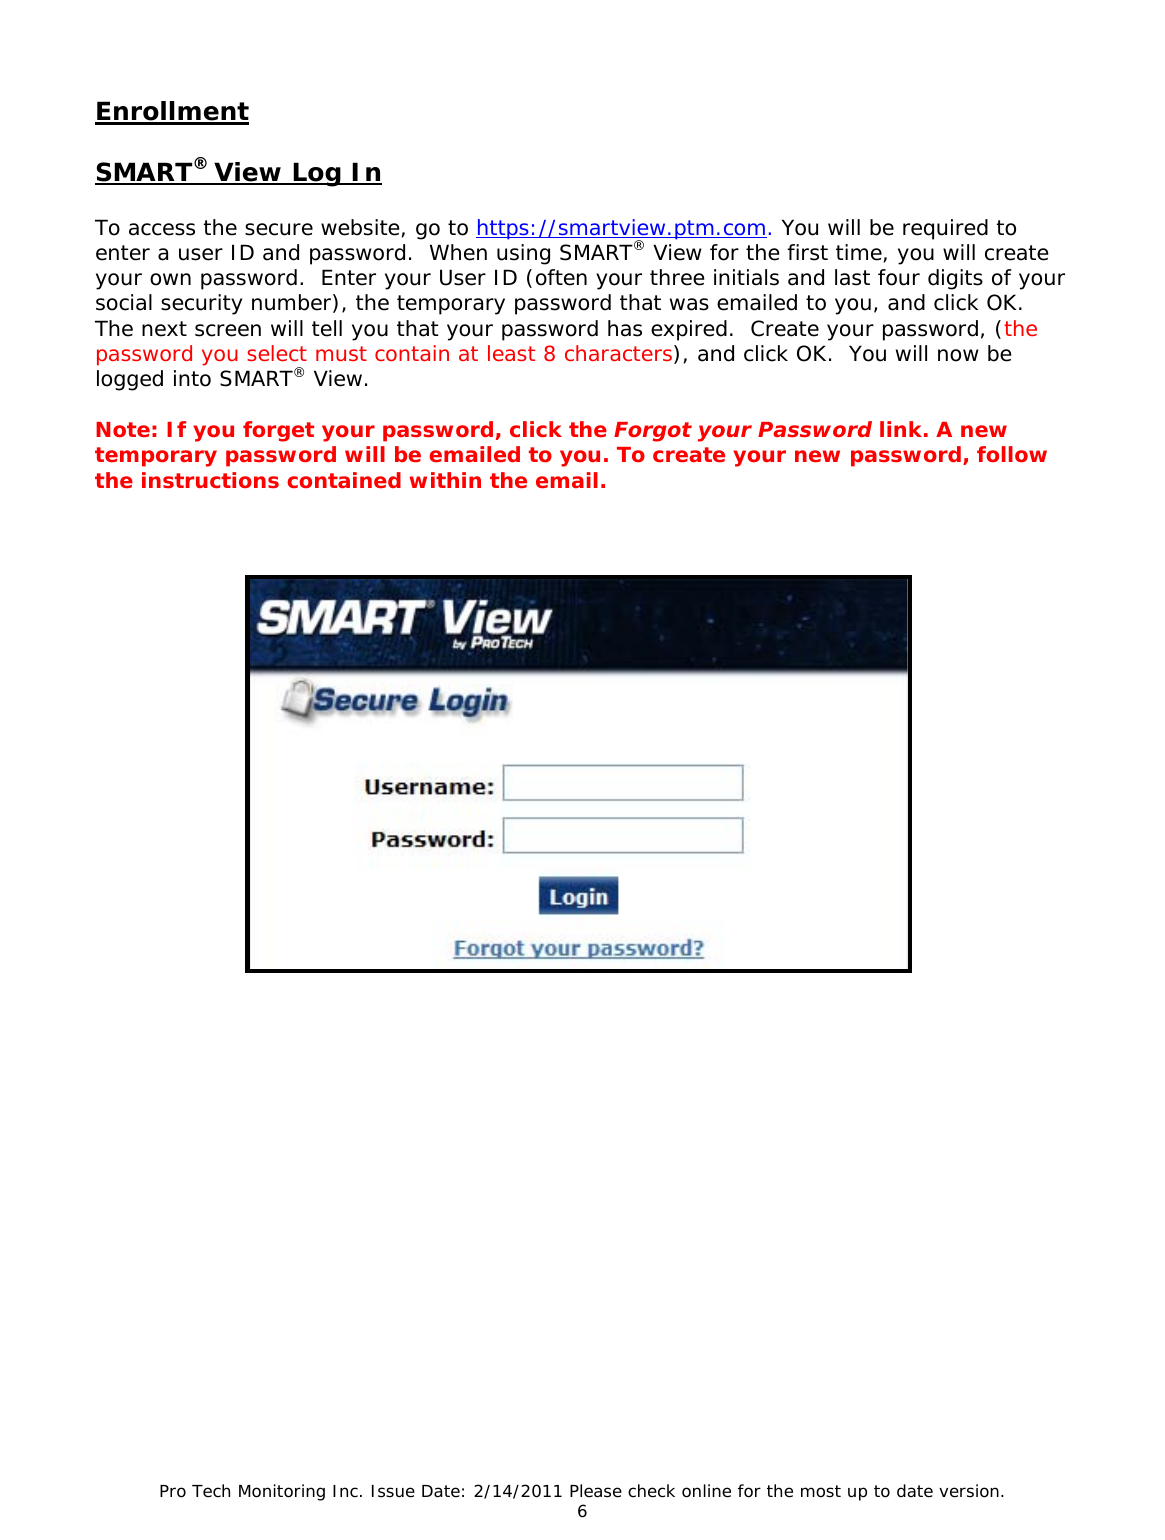 Pro Tech Monitoring Inc. Issue Date: 2/14/2011 Please check online for the most up to date version. 6  Enrollment  SMART® View Log In  To access the secure website, go to https://smartview.ptm.com. You will be required to enter a user ID and password.  When using SMART® View for the first time, you will create your own password.  Enter your User ID (often your three initials and last four digits of your social security number), the temporary password that was emailed to you, and click OK.  The next screen will tell you that your password has expired.  Create your password, (the password you select must contain at least 8 characters), and click OK.  You will now be logged into SMART® View.  Note: If you forget your password, click the Forgot your Password link. A new temporary password will be emailed to you. To create your new password, follow the instructions contained within the email.                                